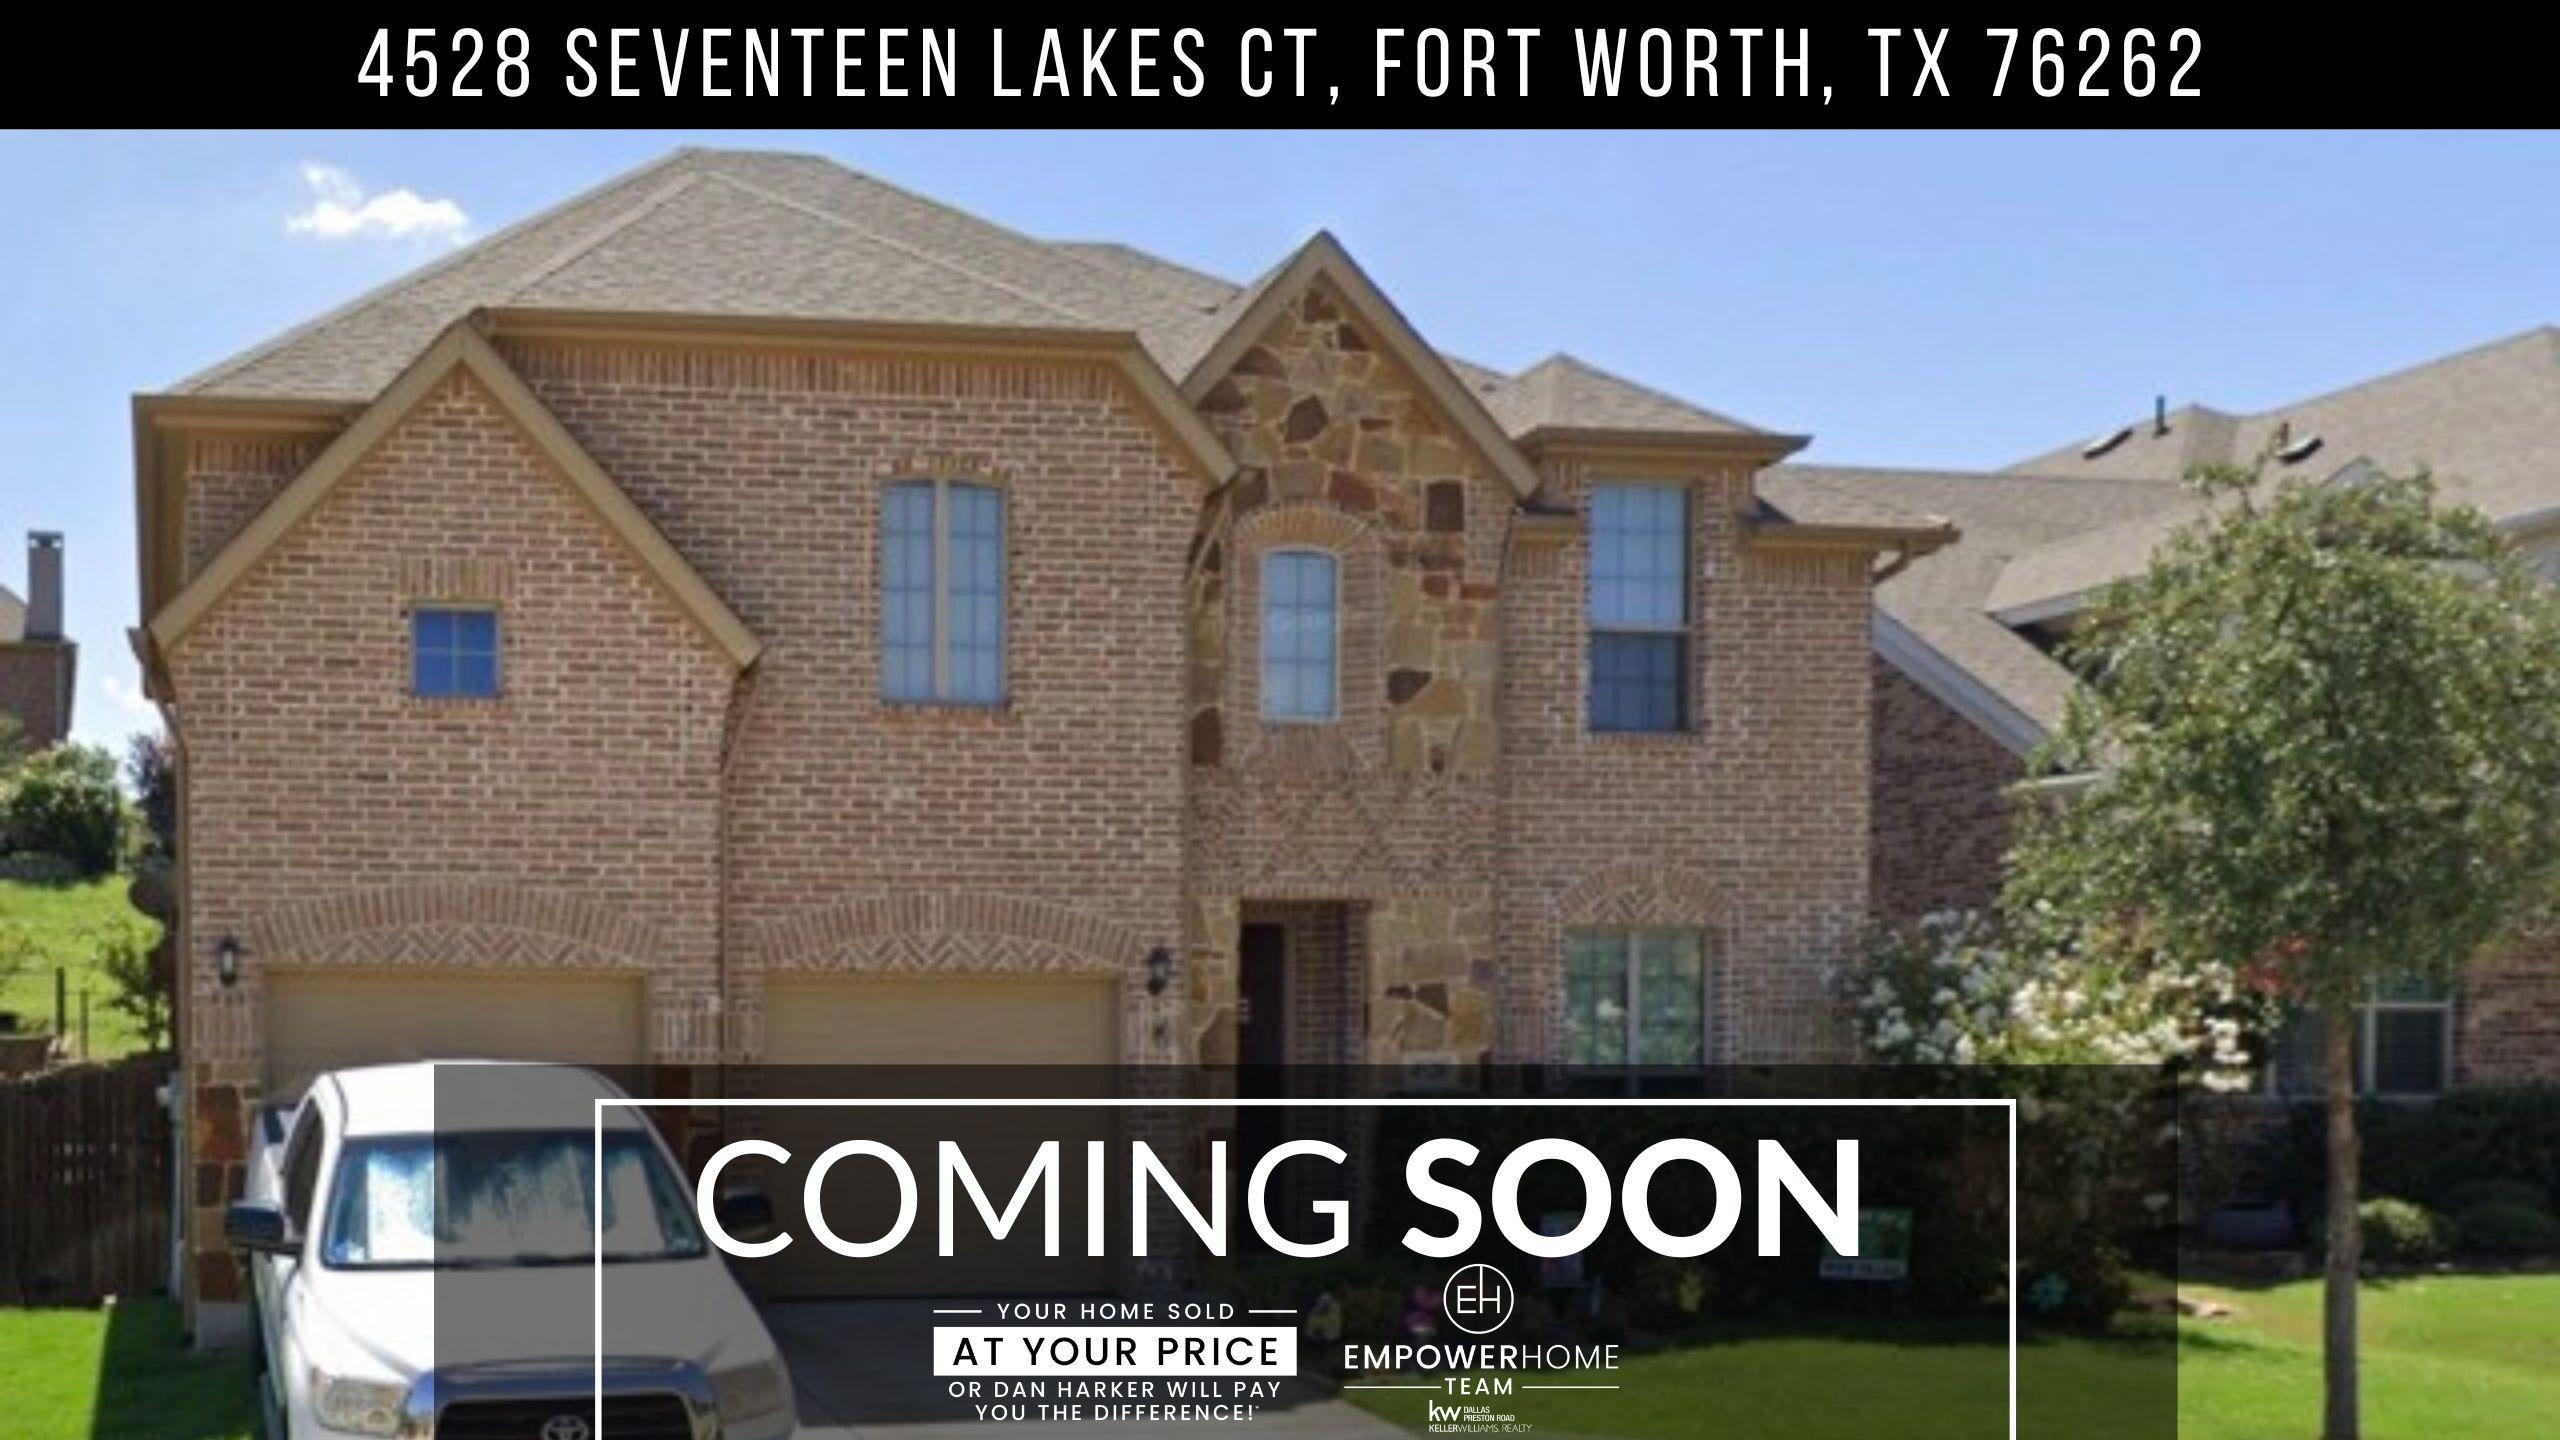 4528 Seventeen Lakes Ct, Fort Worth, TX 76262